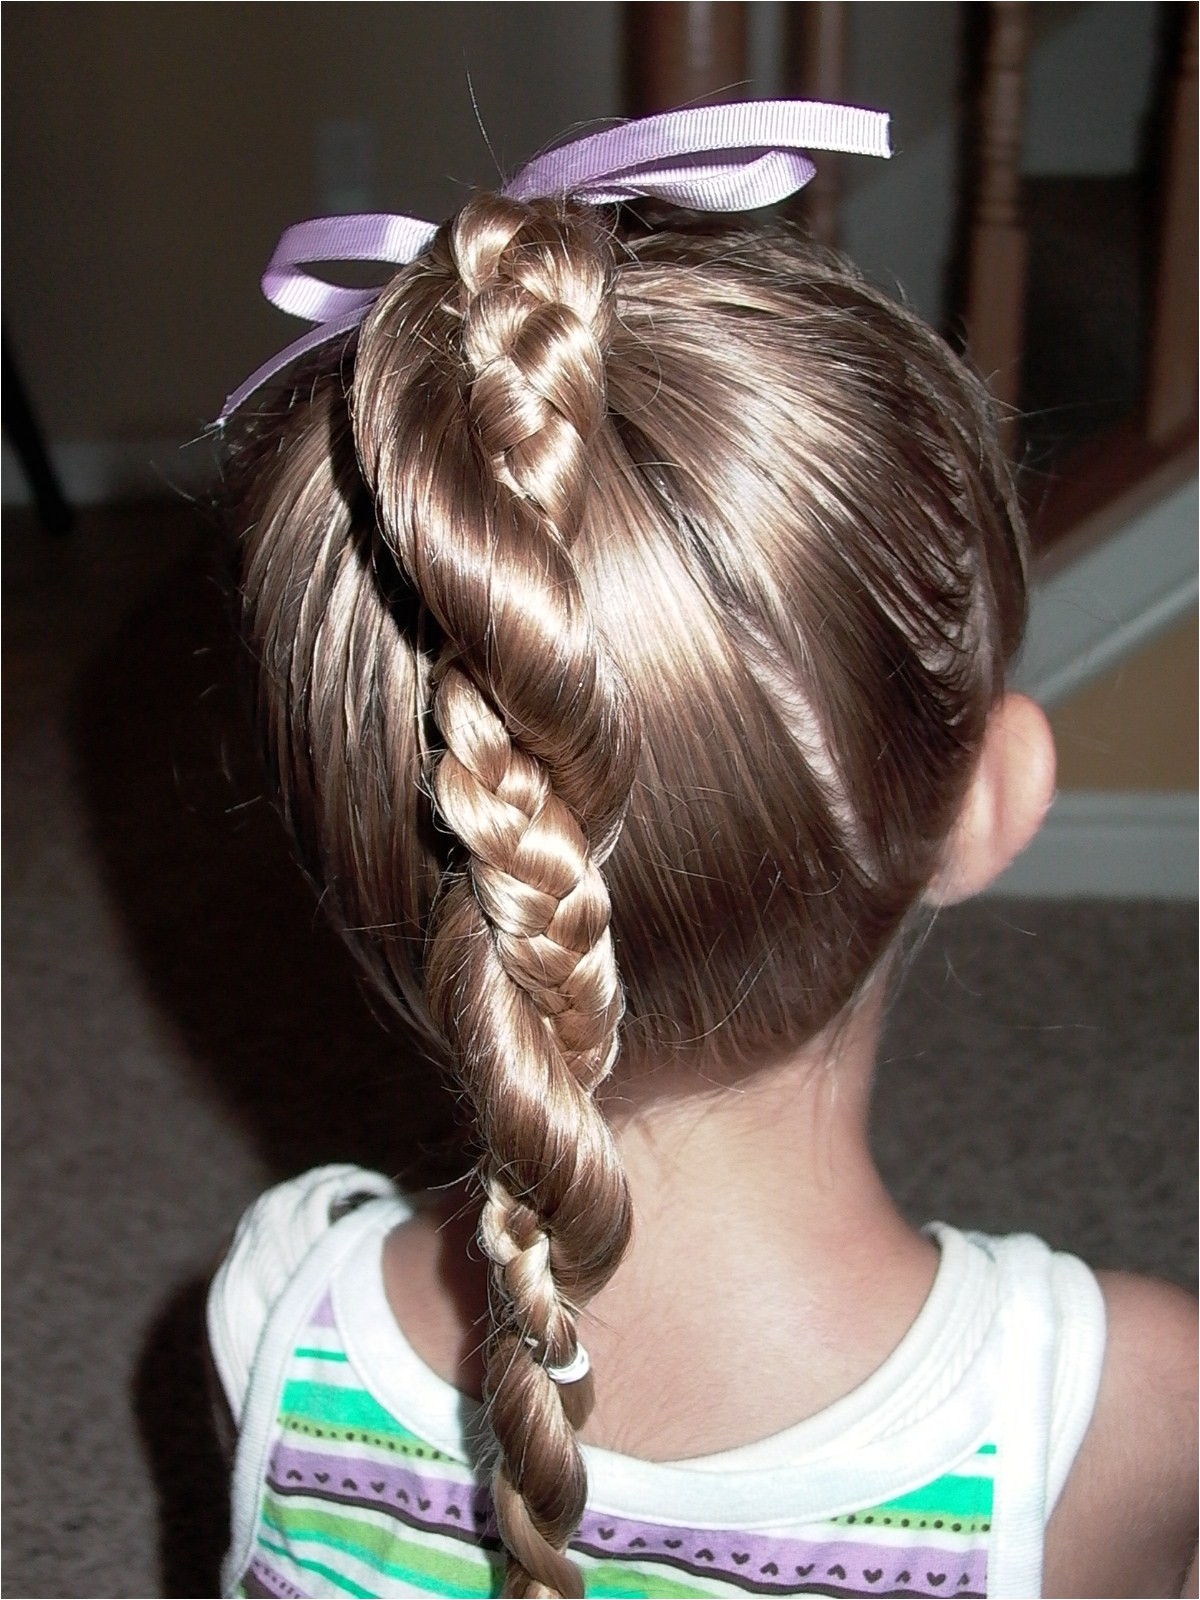 Picture Hairstyles For 7 Year Olds Simple hairstyle ideas of Easy hairstyles for little